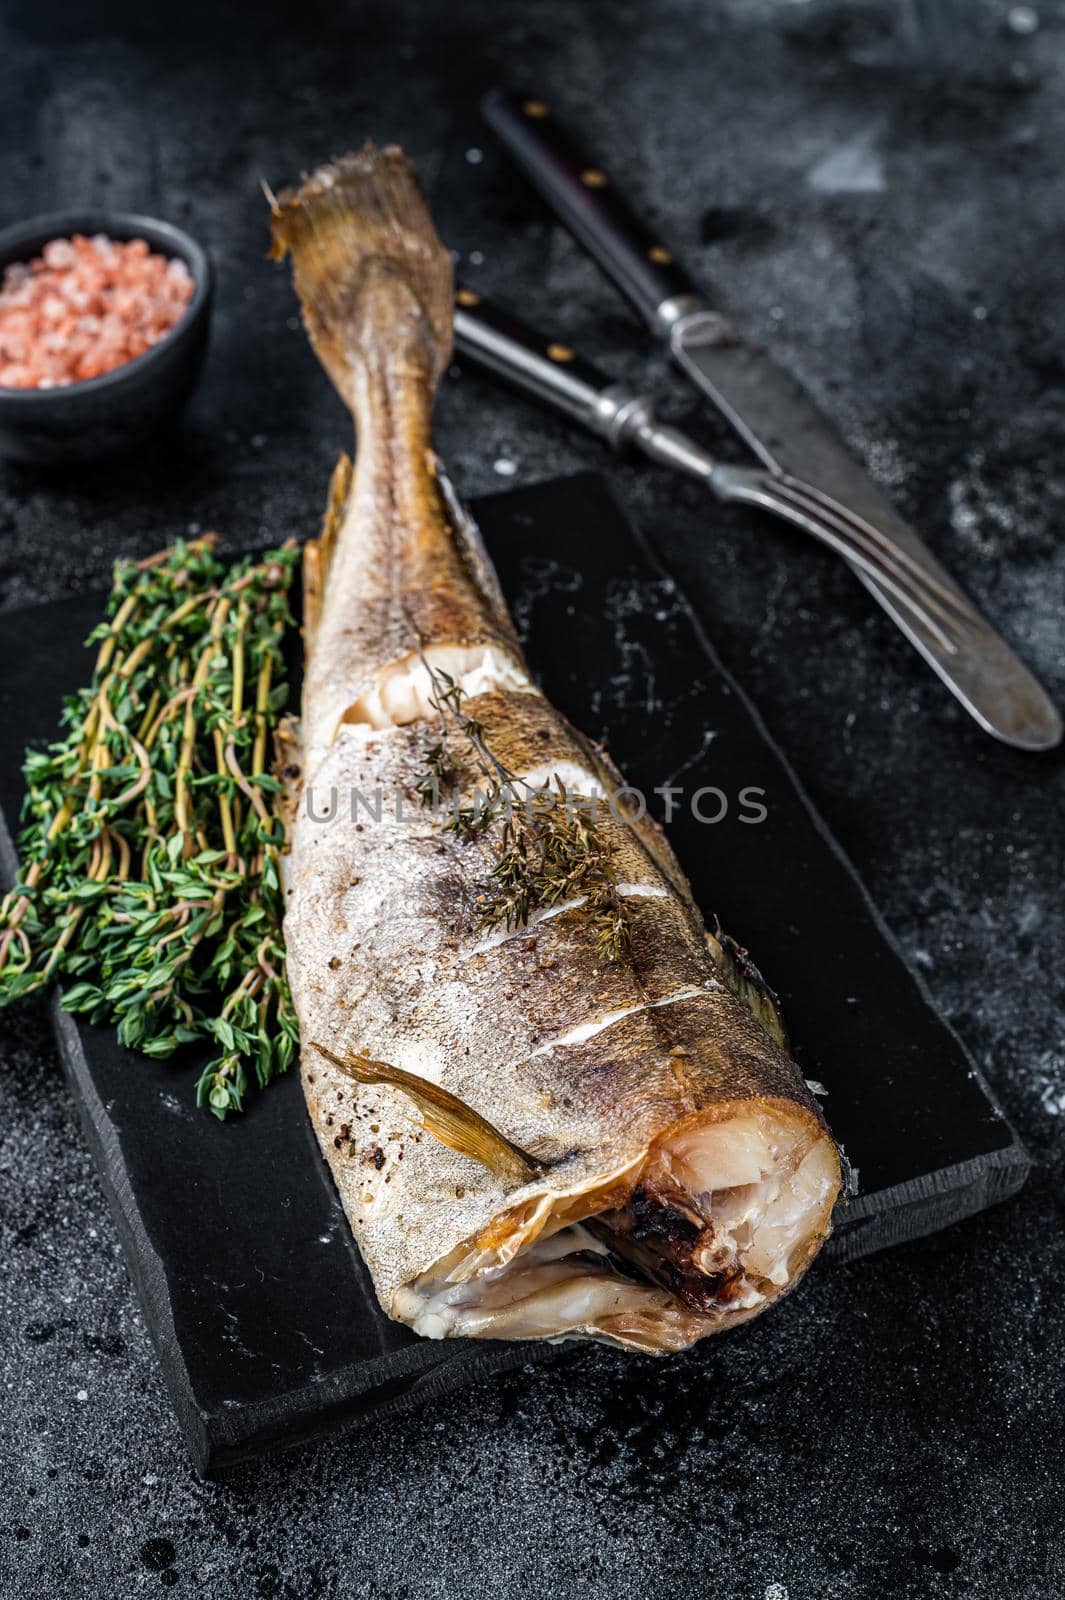 Roasted cod white fish with thyme on marble board. Black background. Top view.